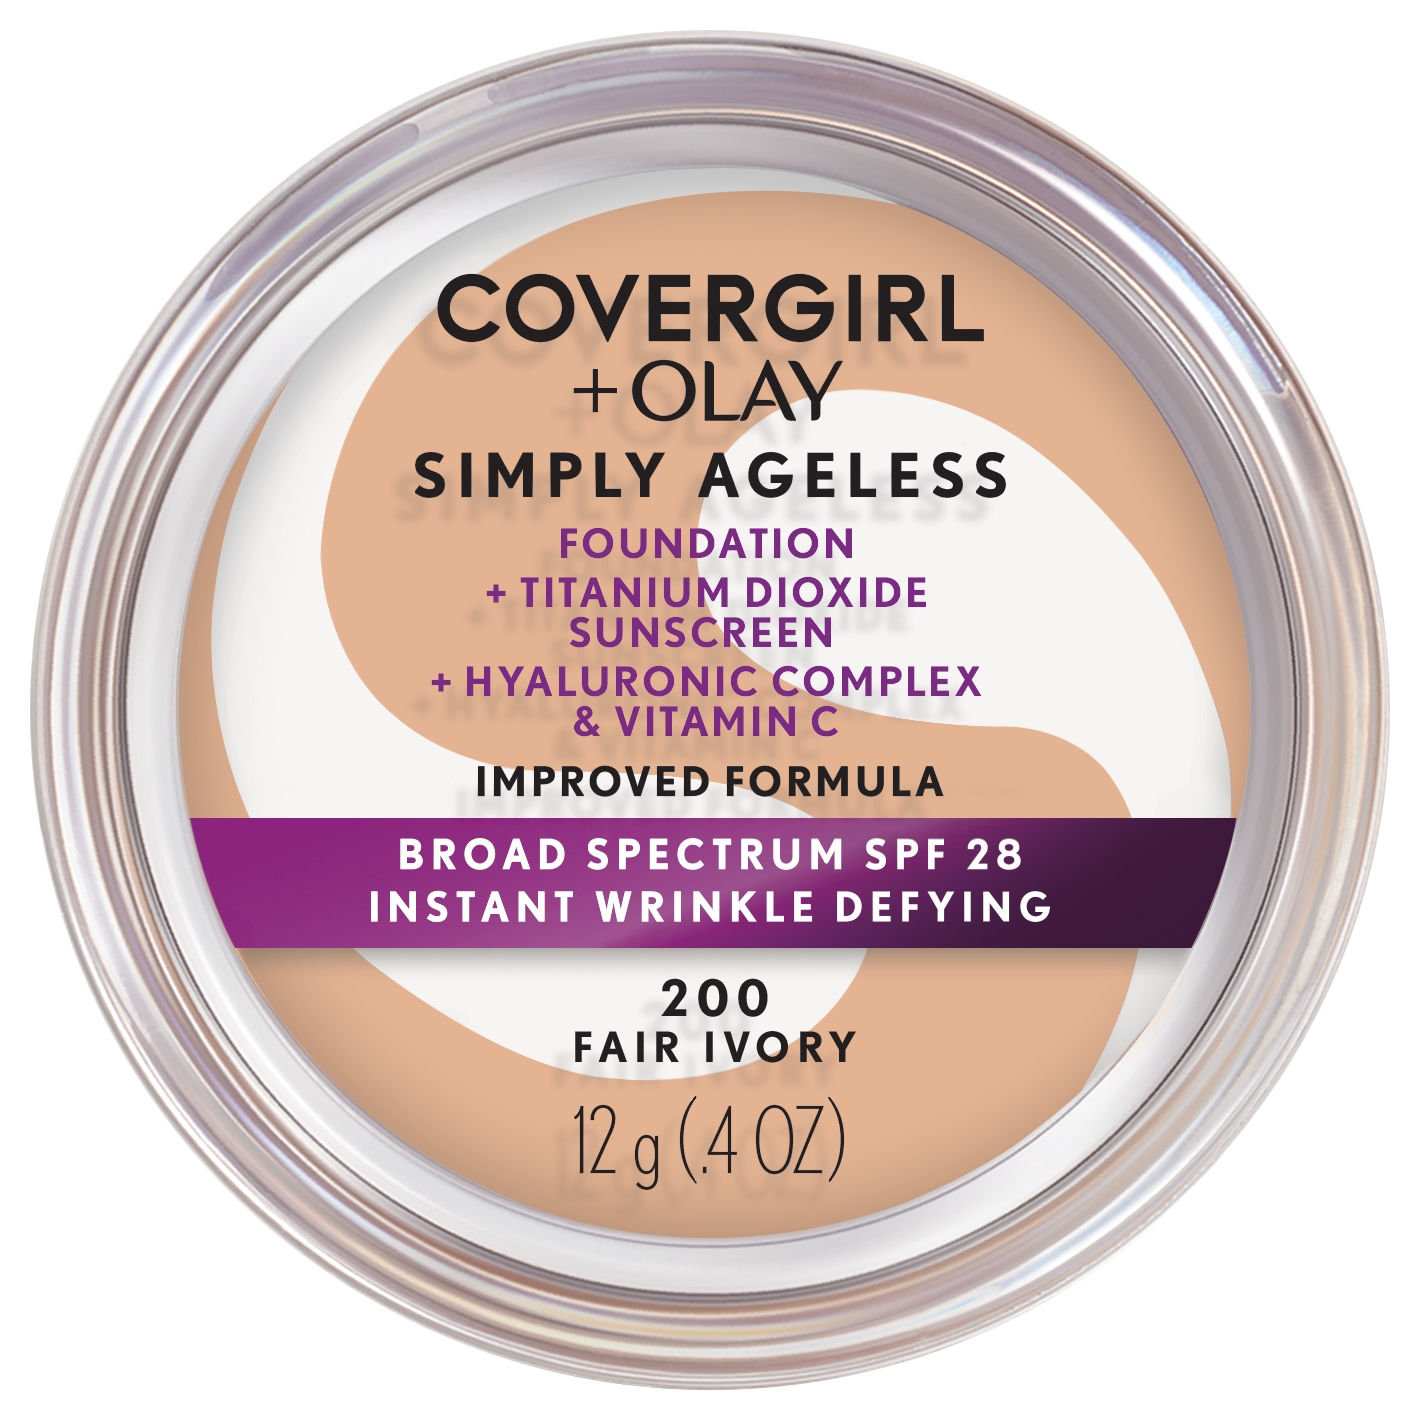 COVERGIRL + OLAY Simply Ageless Instant Wrinkle-Defying Foundation with SPF 28, Fair Ivory, 0.44 oz - image 1 of 9